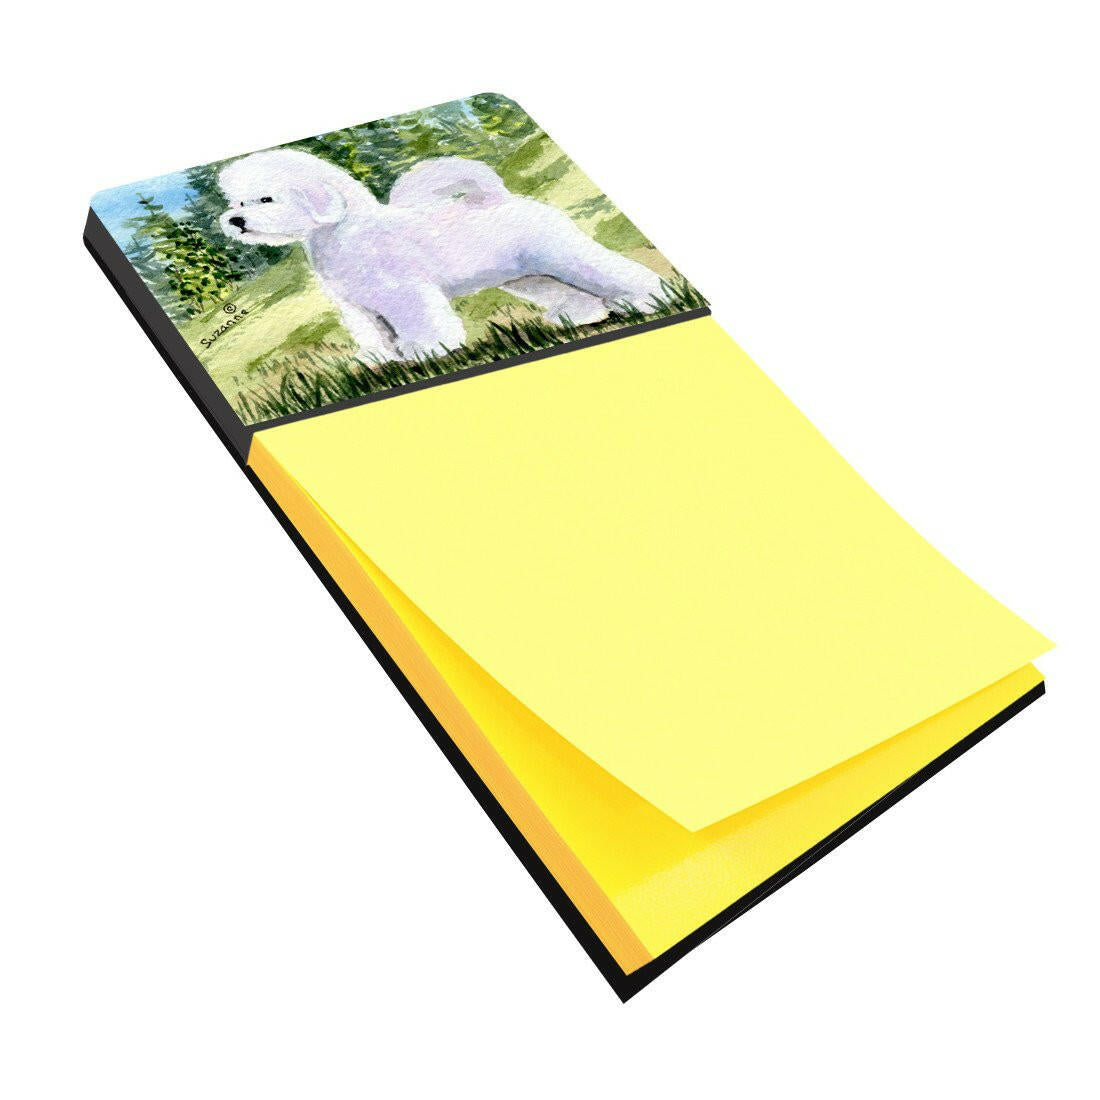 Bichon Frise Refiillable Sticky Note Holder or Postit Note Dispenser SS8900SN by Caroline's Treasures